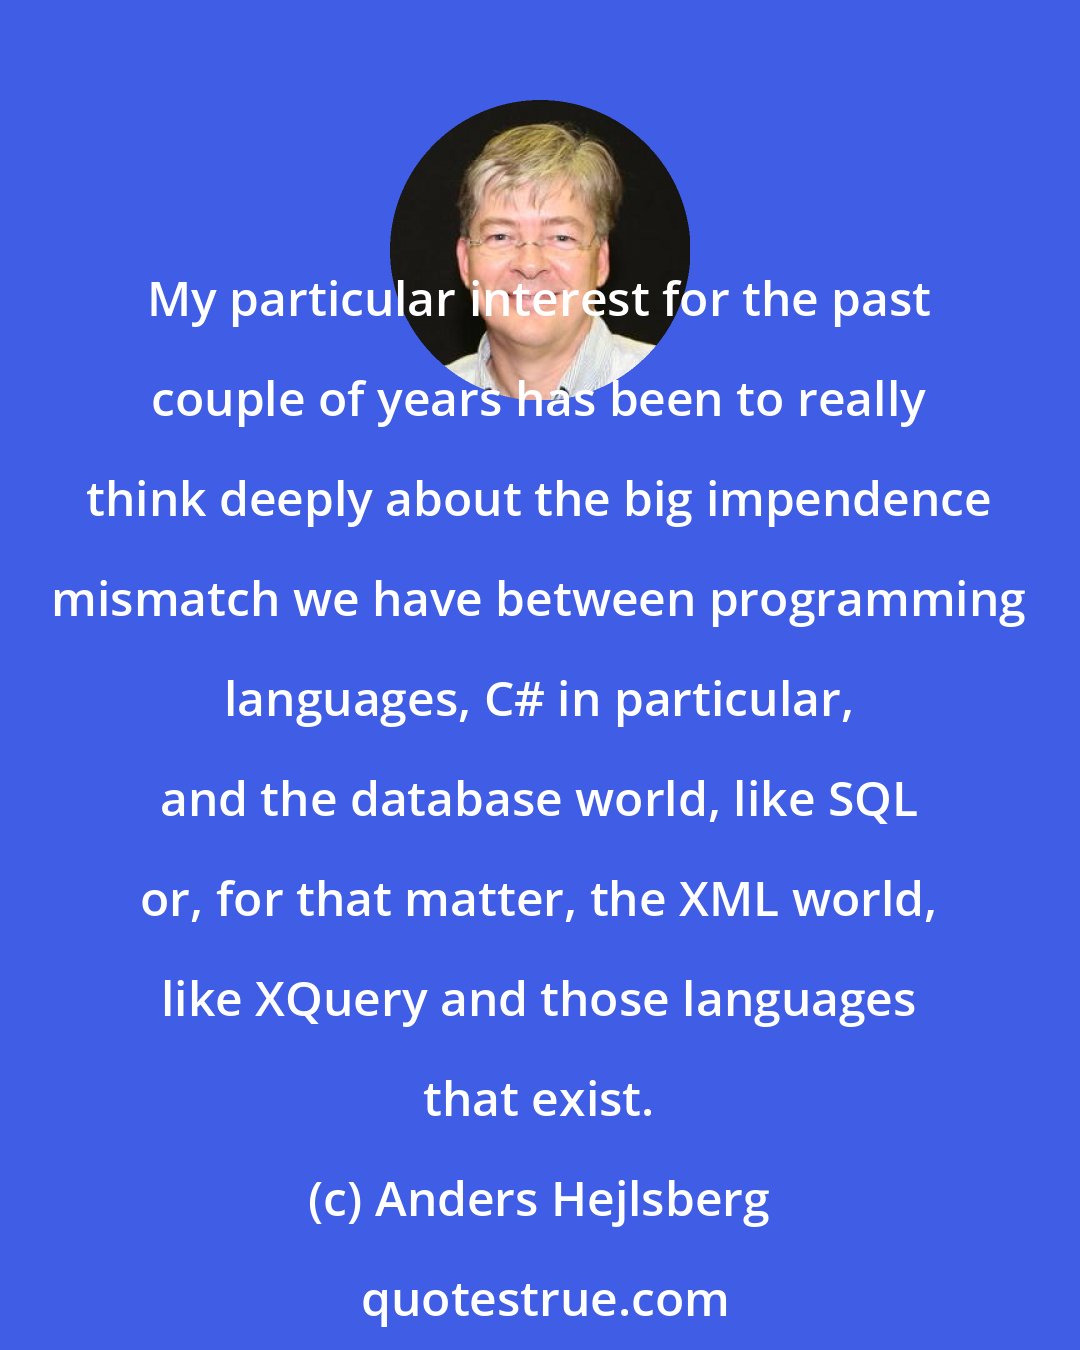 Anders Hejlsberg: My particular interest for the past couple of years has been to really think deeply about the big impendence mismatch we have between programming languages, C# in particular, and the database world, like SQL or, for that matter, the XML world, like XQuery and those languages that exist.